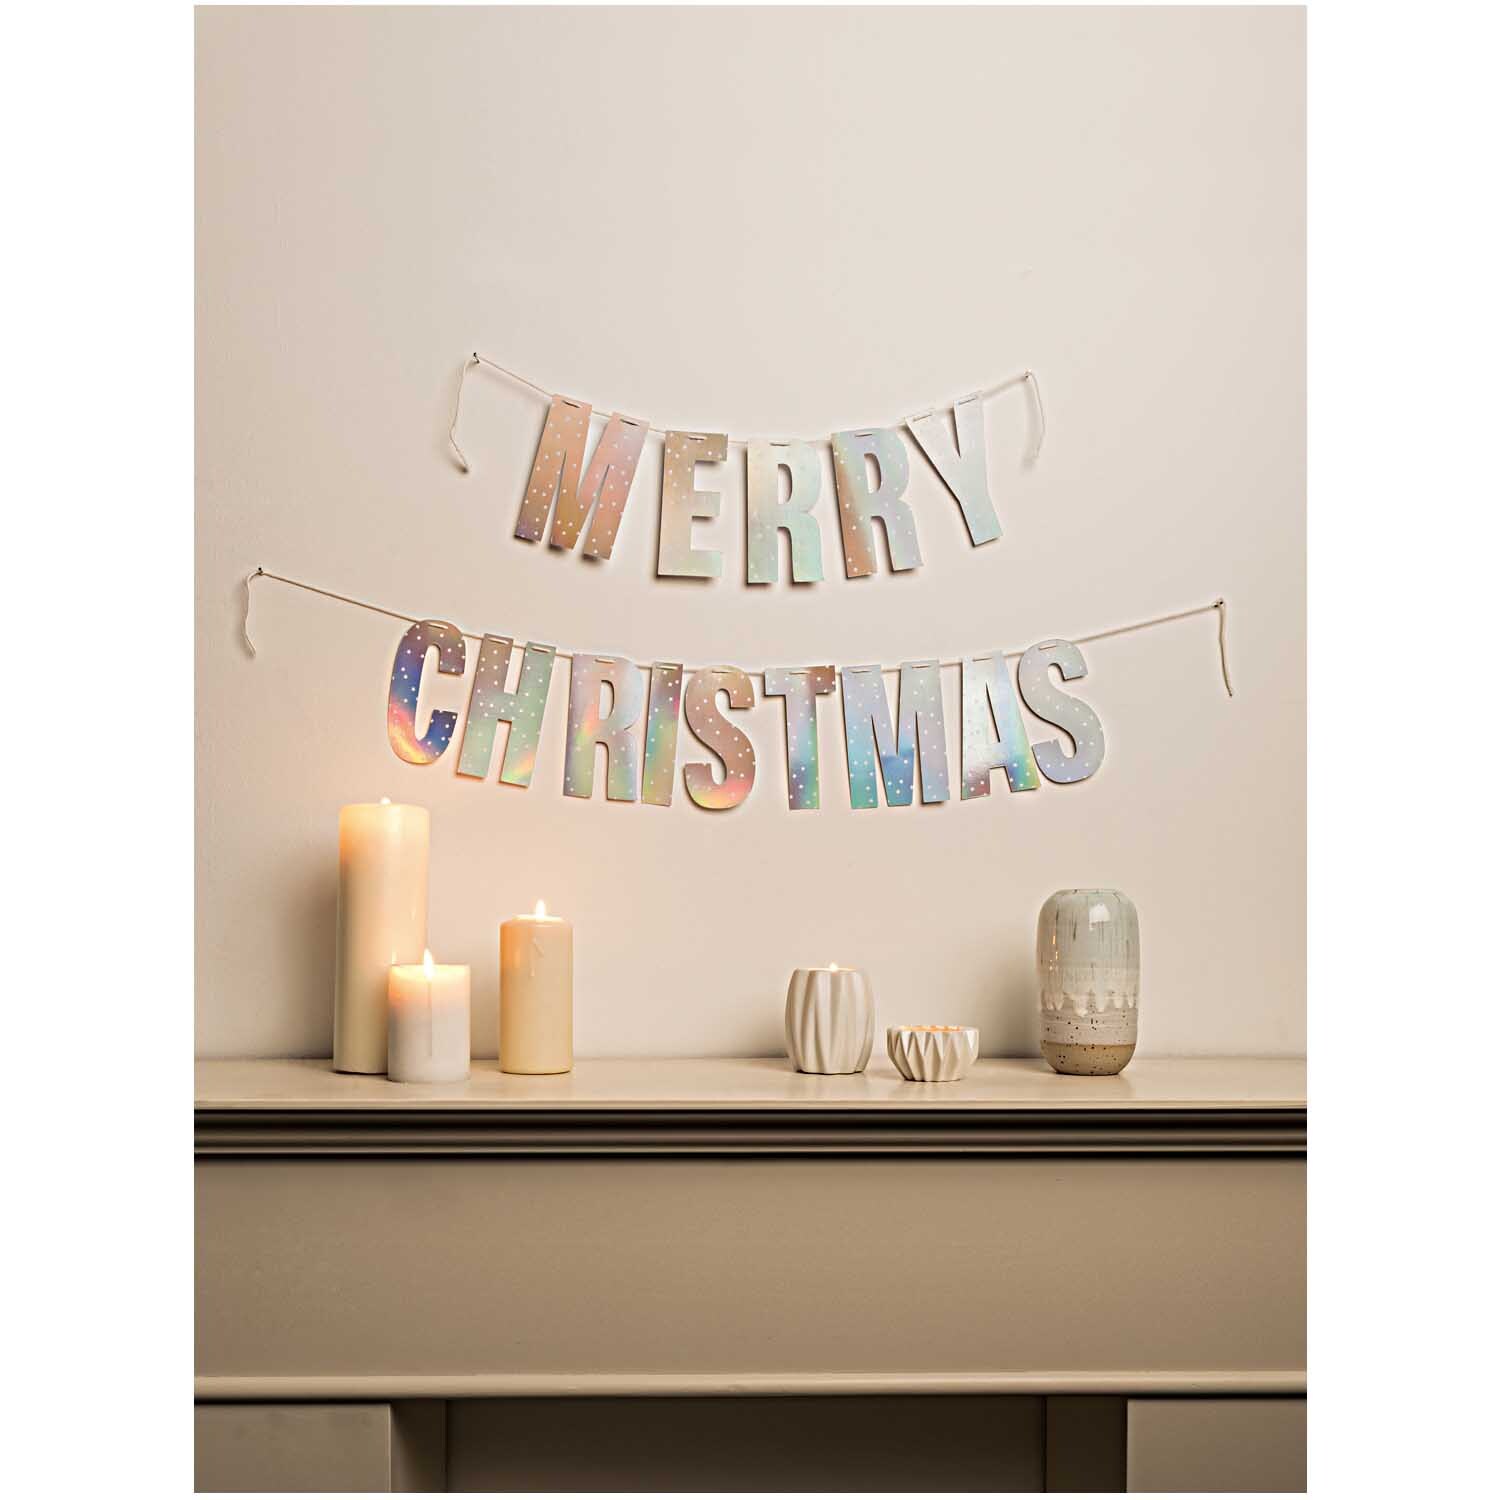 Paper Poetry Girlande Merry Christmas 3m Hot Foil